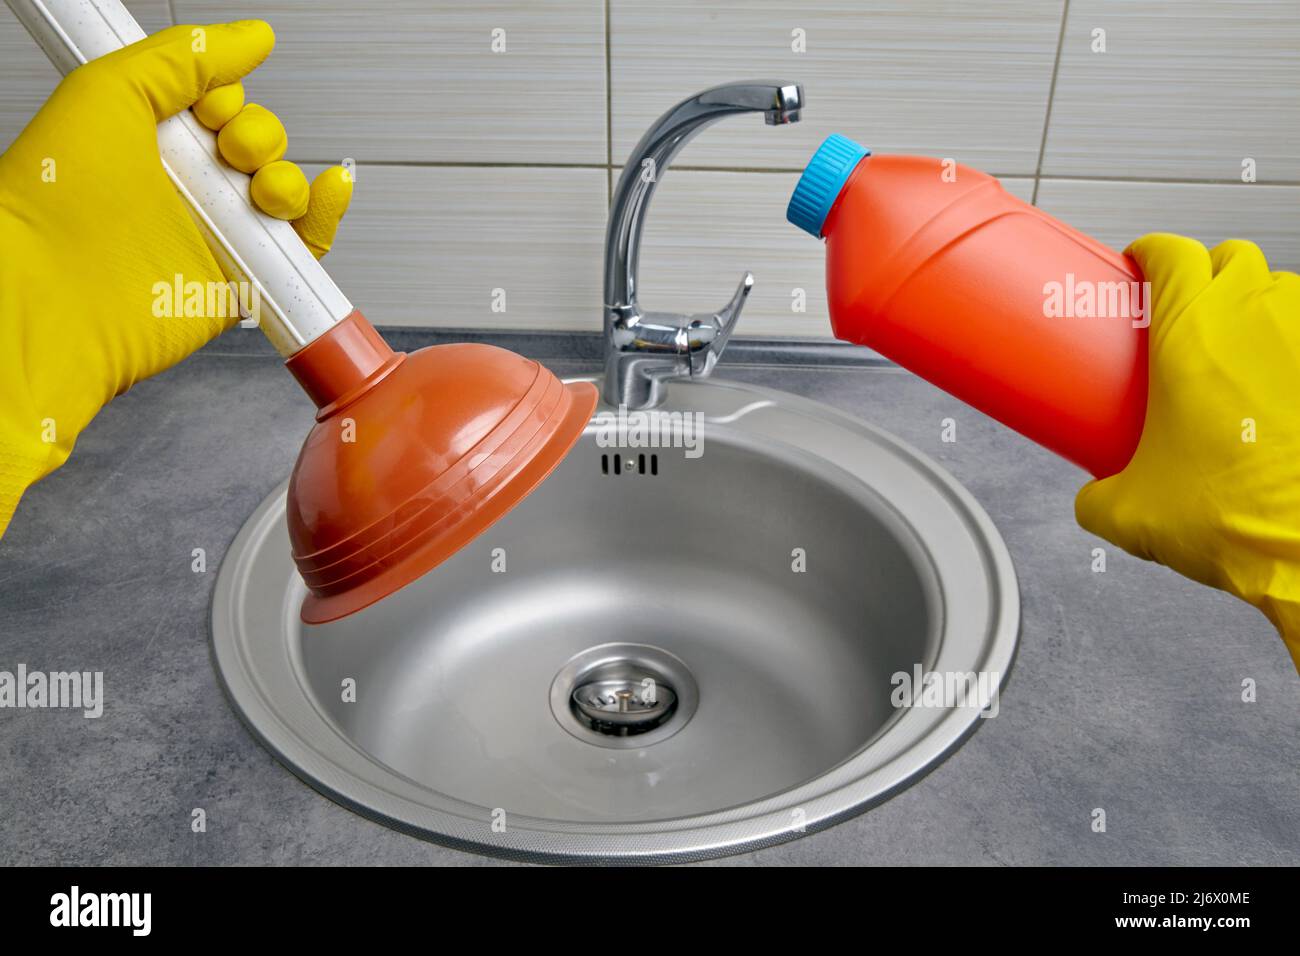 Unclogging a kitchen sink drain…without gloves. #plumbing #plumber